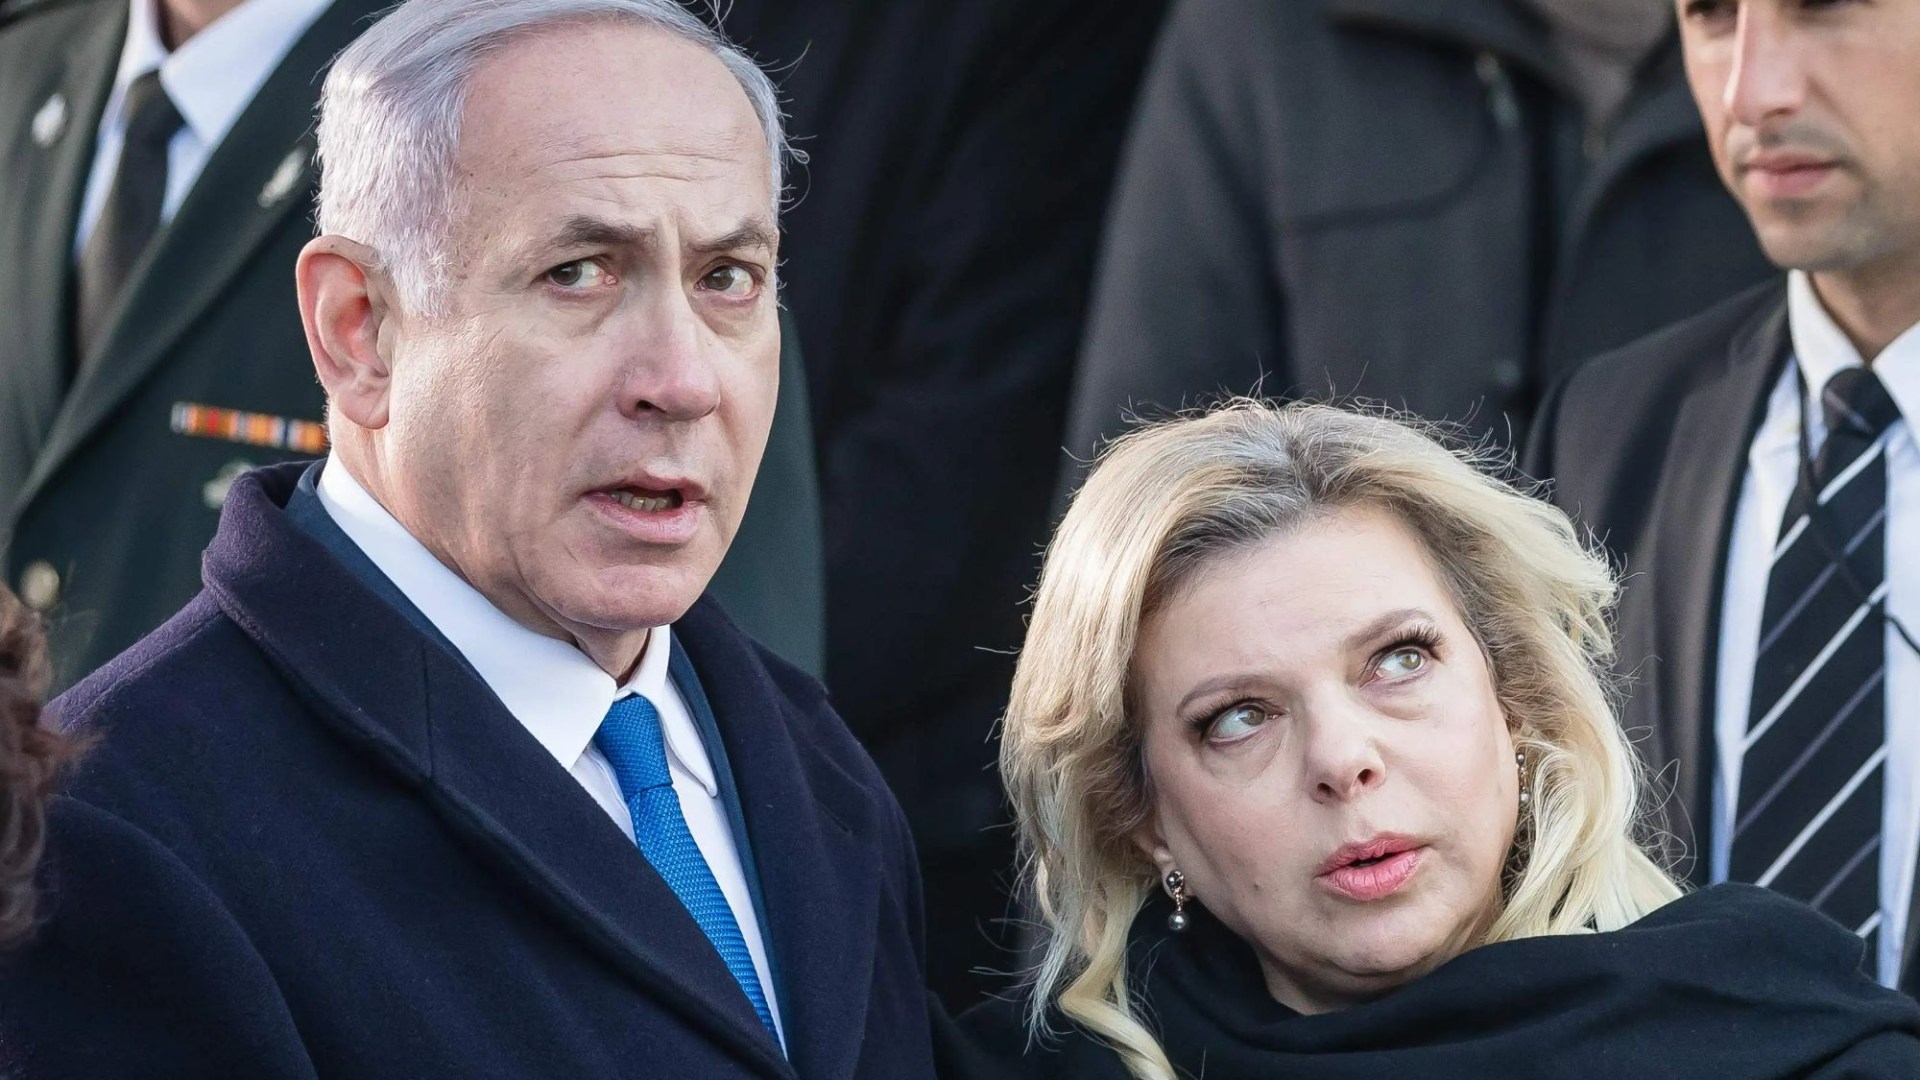 I was sacked by Netanyahus WIFE – my row with Lord Cameron was hyped-up nonsense, says ex-Israel spokesman Eylon Levy [Video]